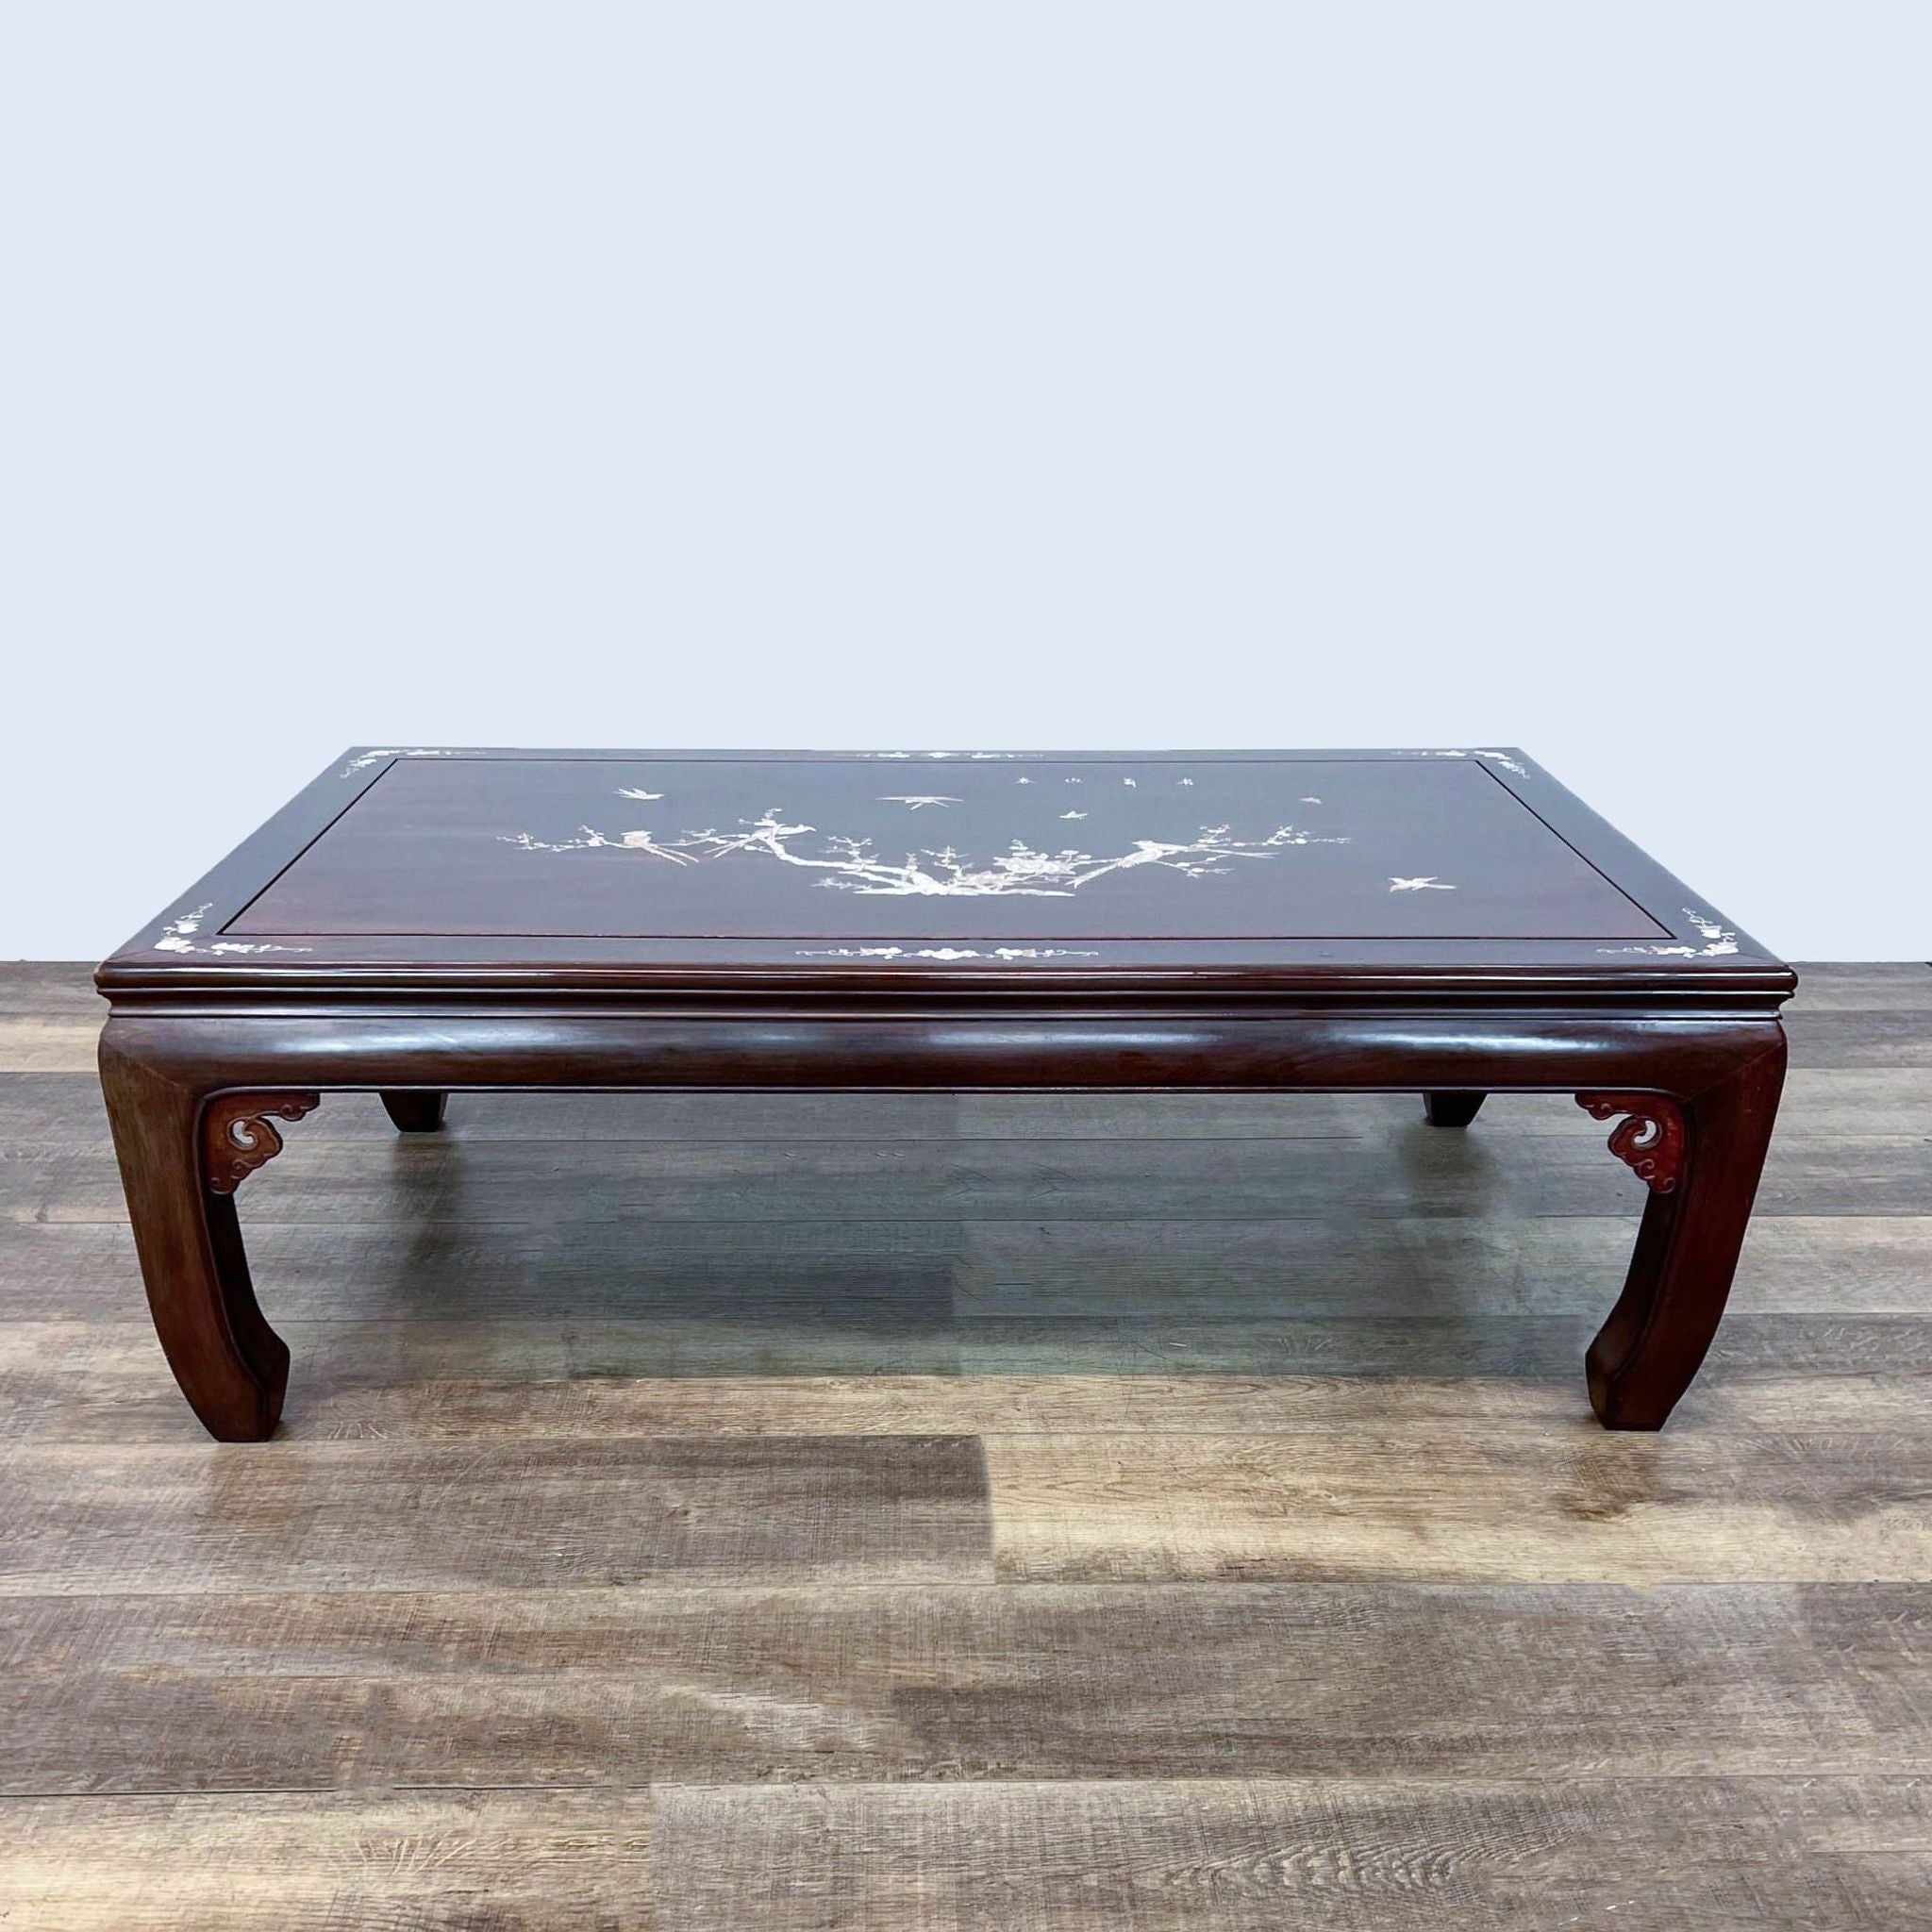 Reperch coffee table with elegant mother of pearl inlay on dark wood, set against a grey background.